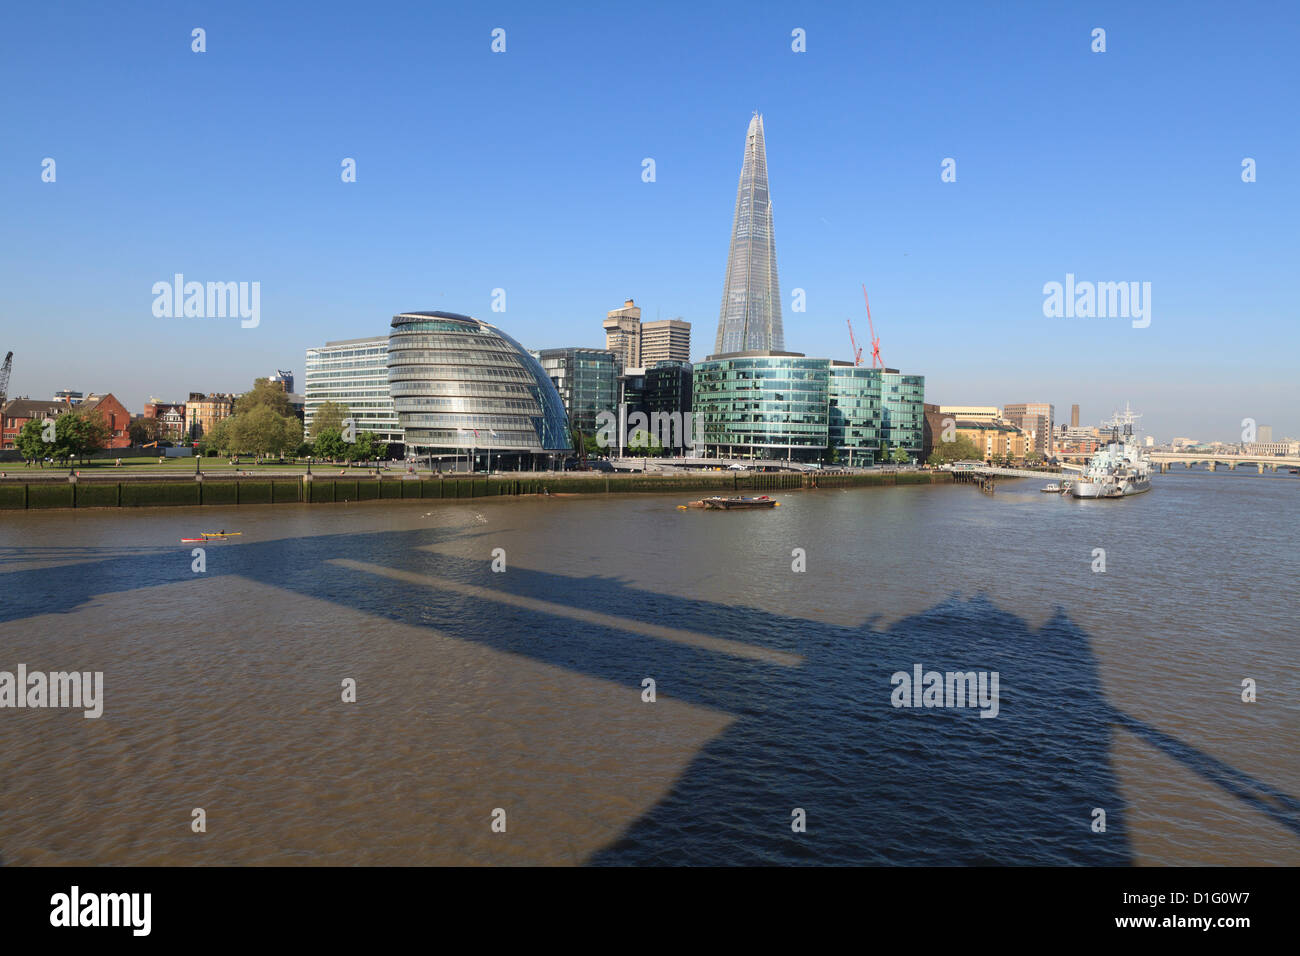 South Bank with City Hall, Shard London Bridge, the shadow of Tower Bridge in the foreground, London, England Stock Photo